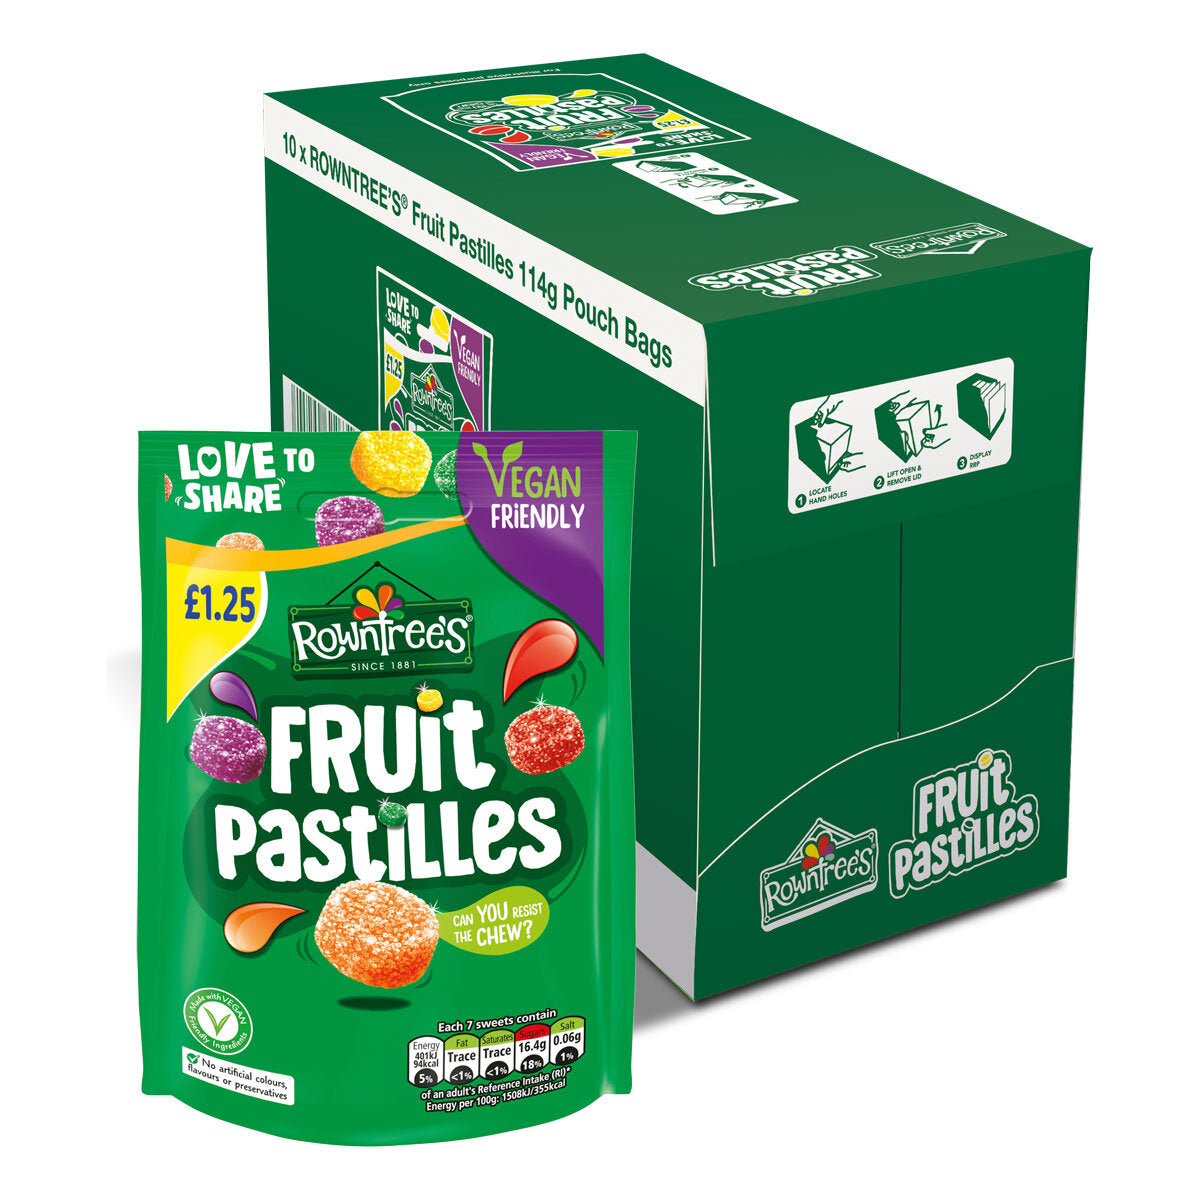 Rowntree's Fruit Pastilles - 10 Packs of 114g - Bursting with Fruity Goodness